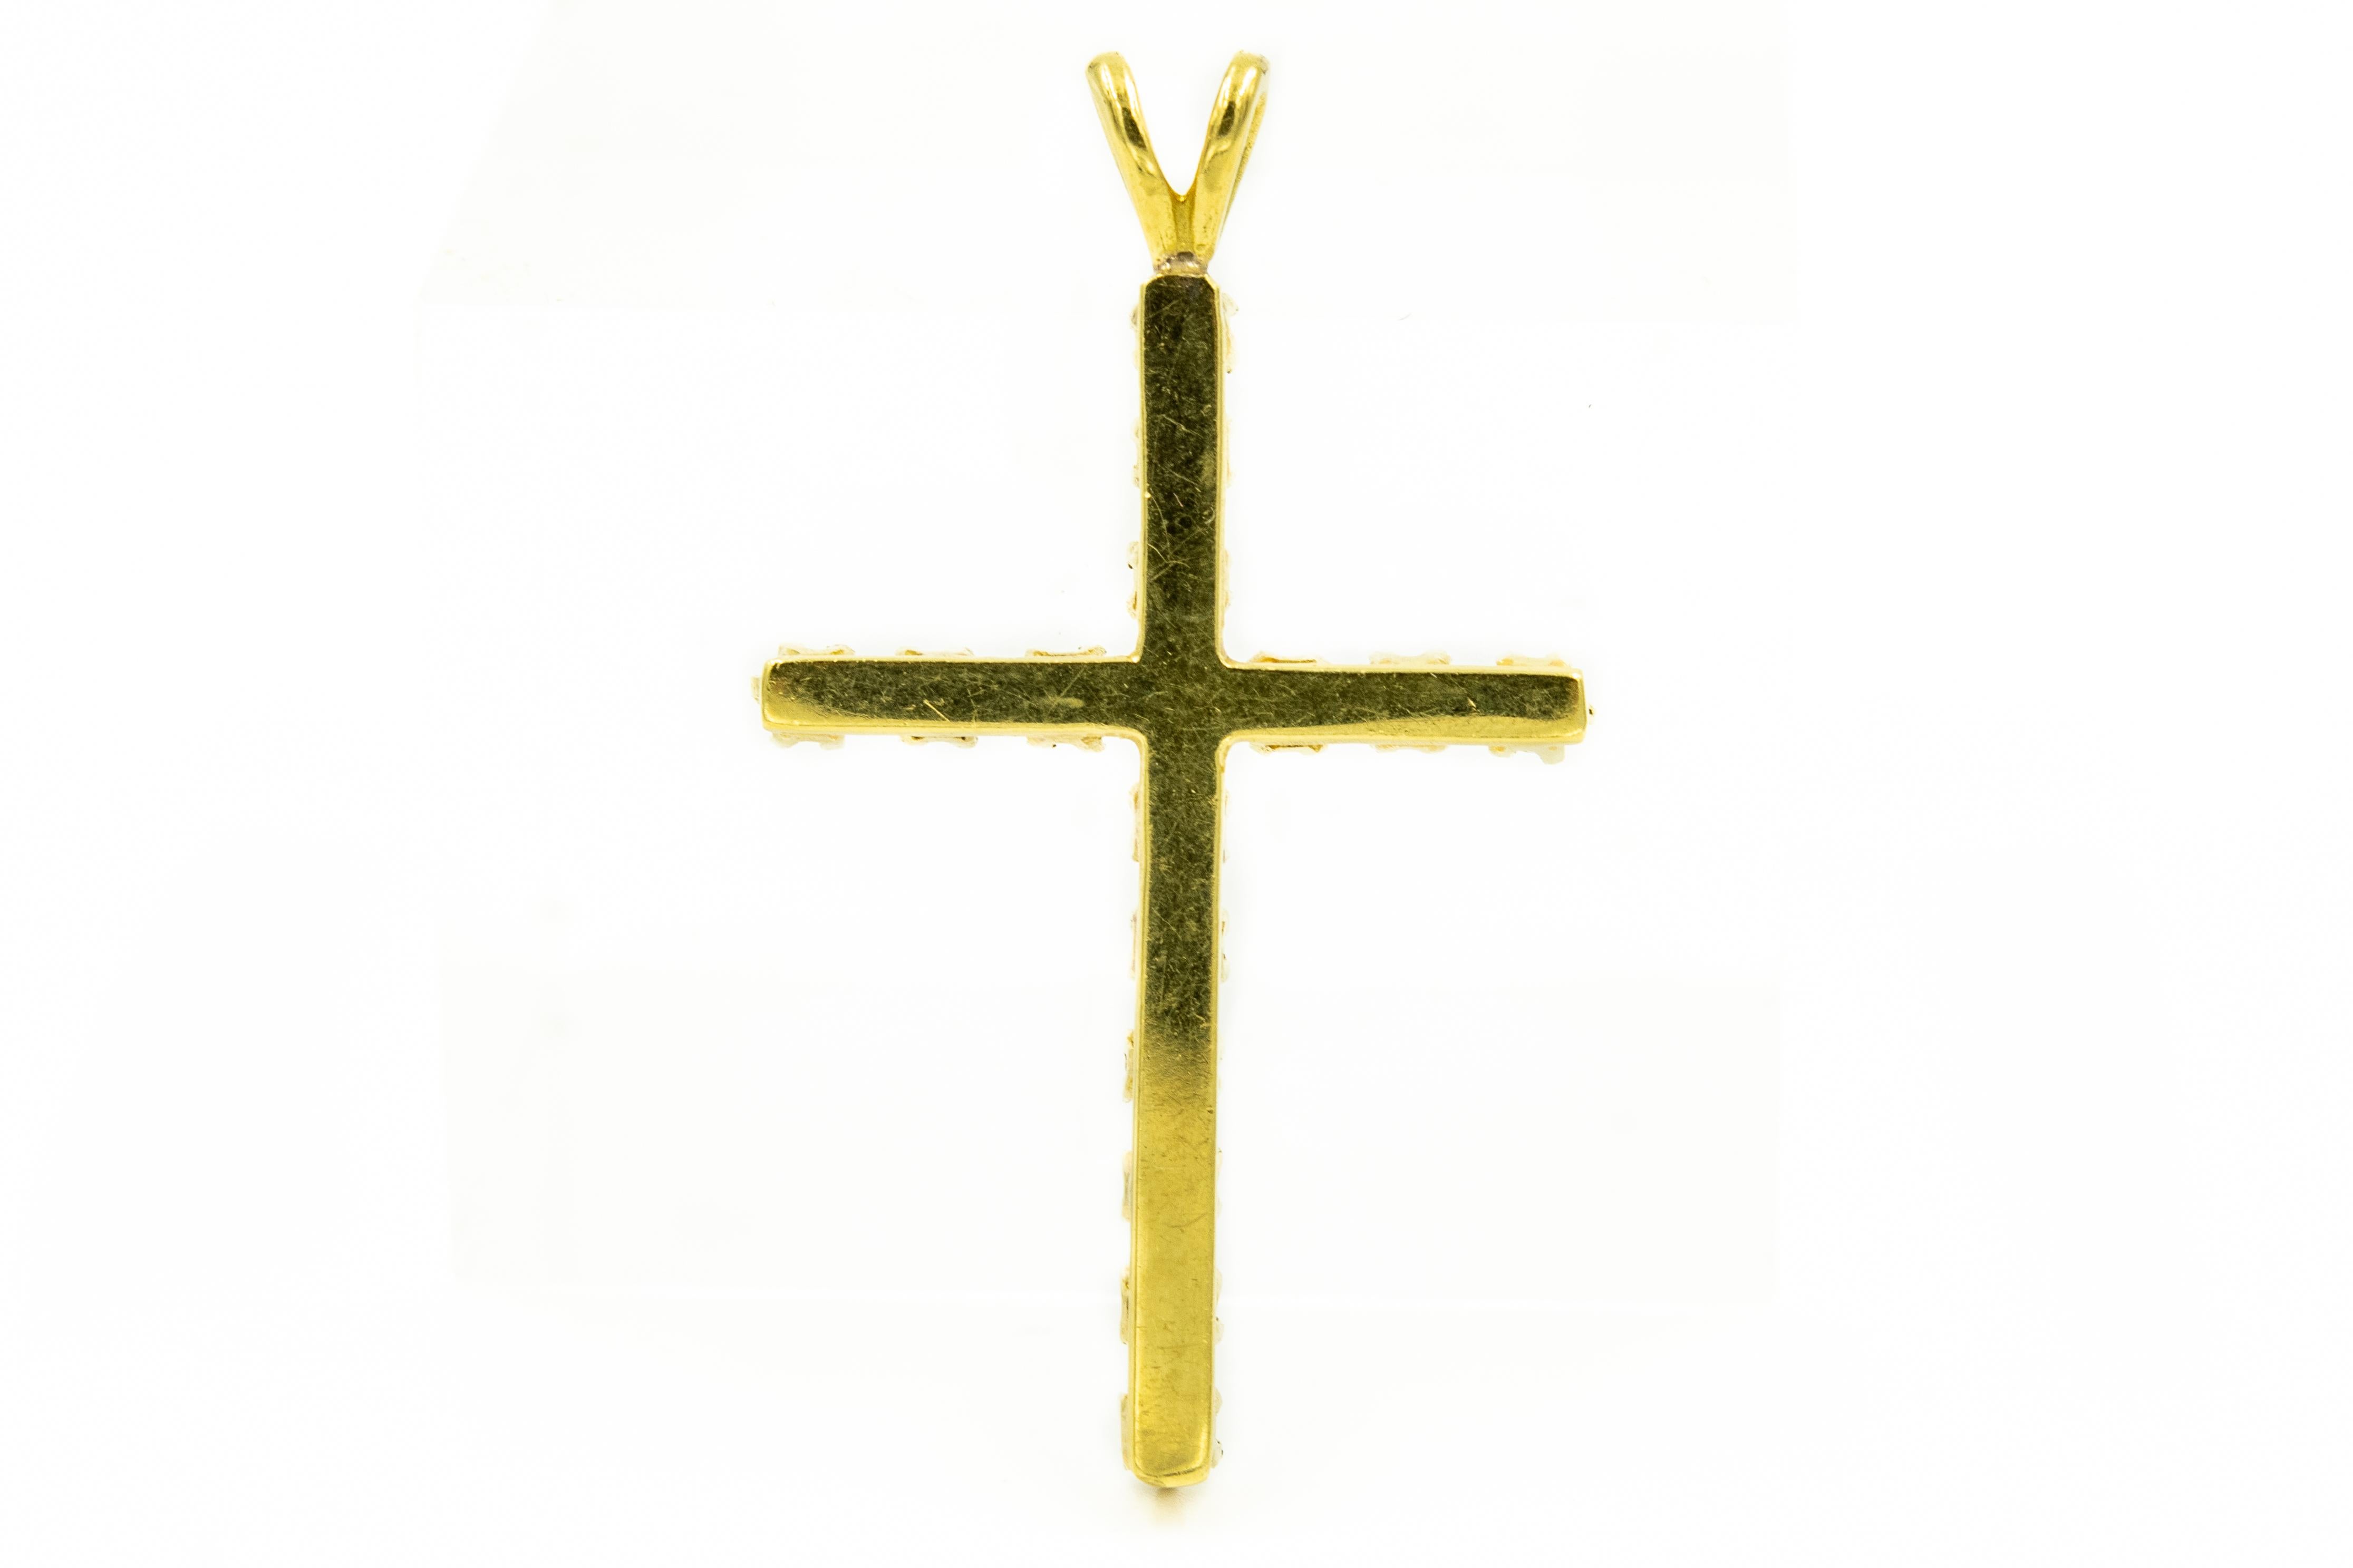 Elegant classic 14k yellow gold diamond cross featuring 16 nice quality diamonds weighting approximately .05 carats each for a total weight of .80 carats in diamonds.  The cross has a rabbit ear on top for you to put your chain through the hole for